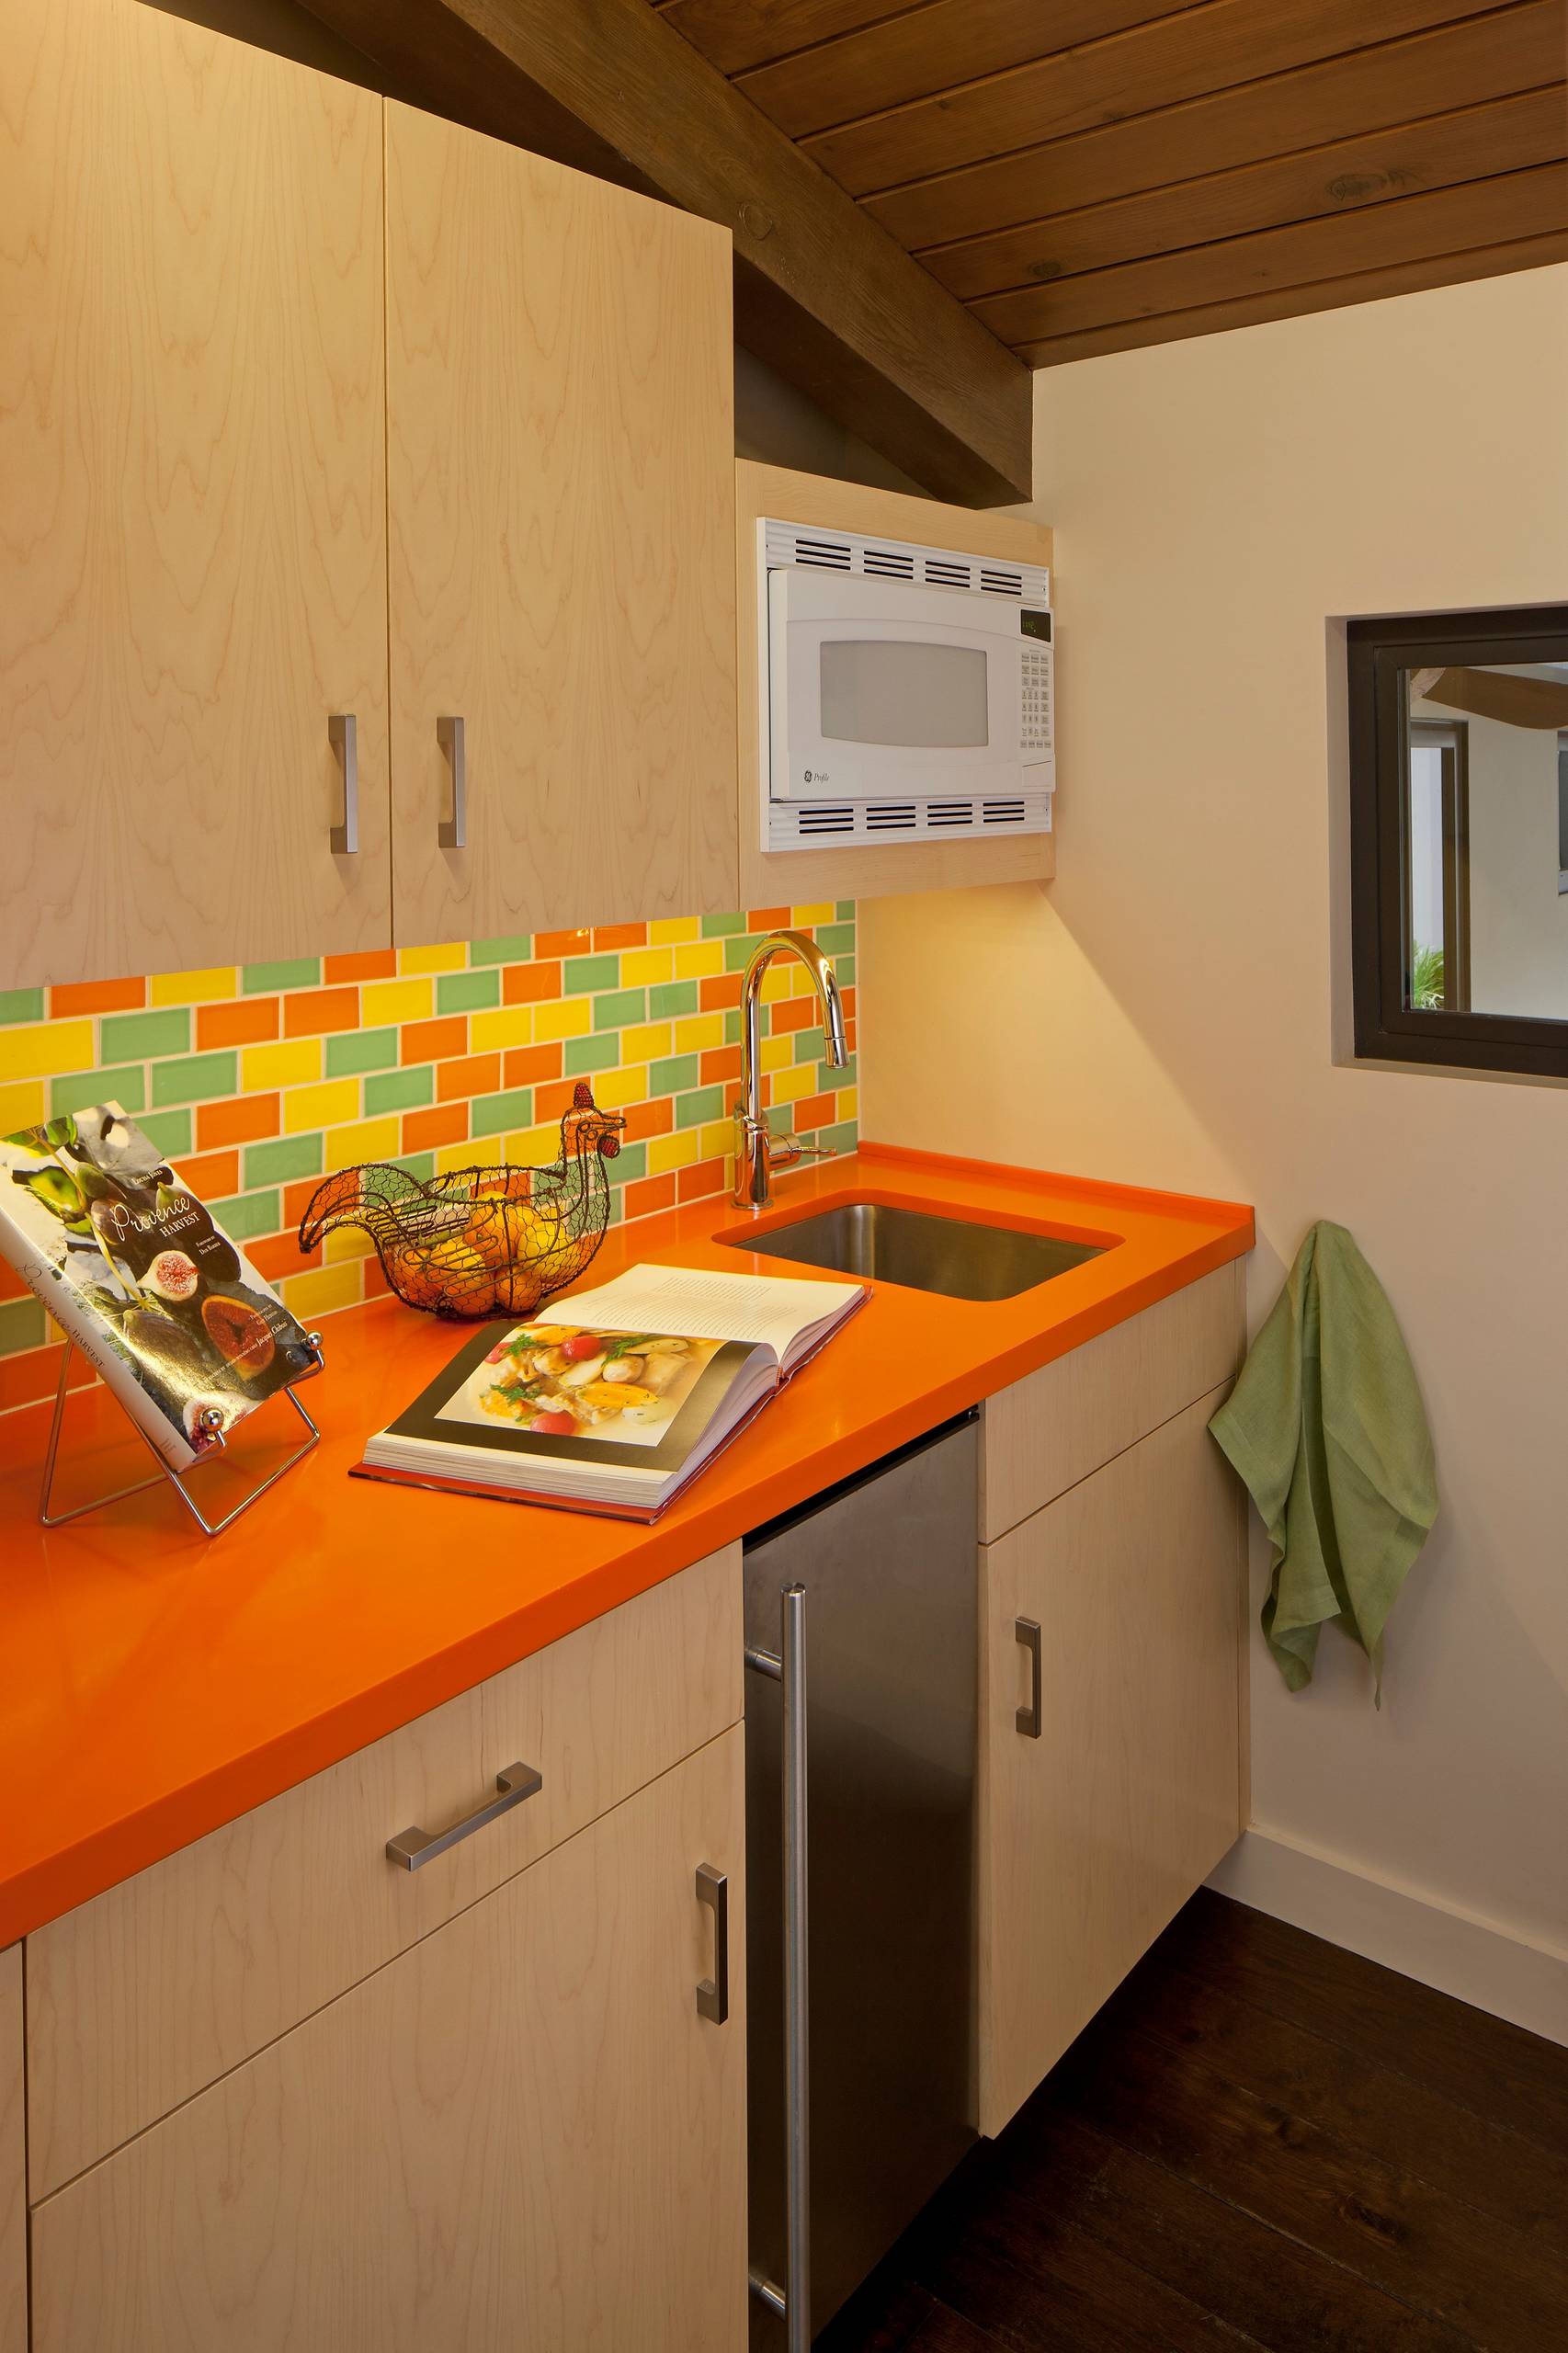 75 Kitchen with Orange Countertops Ideas You'll Love - February, 2023 |  Houzz